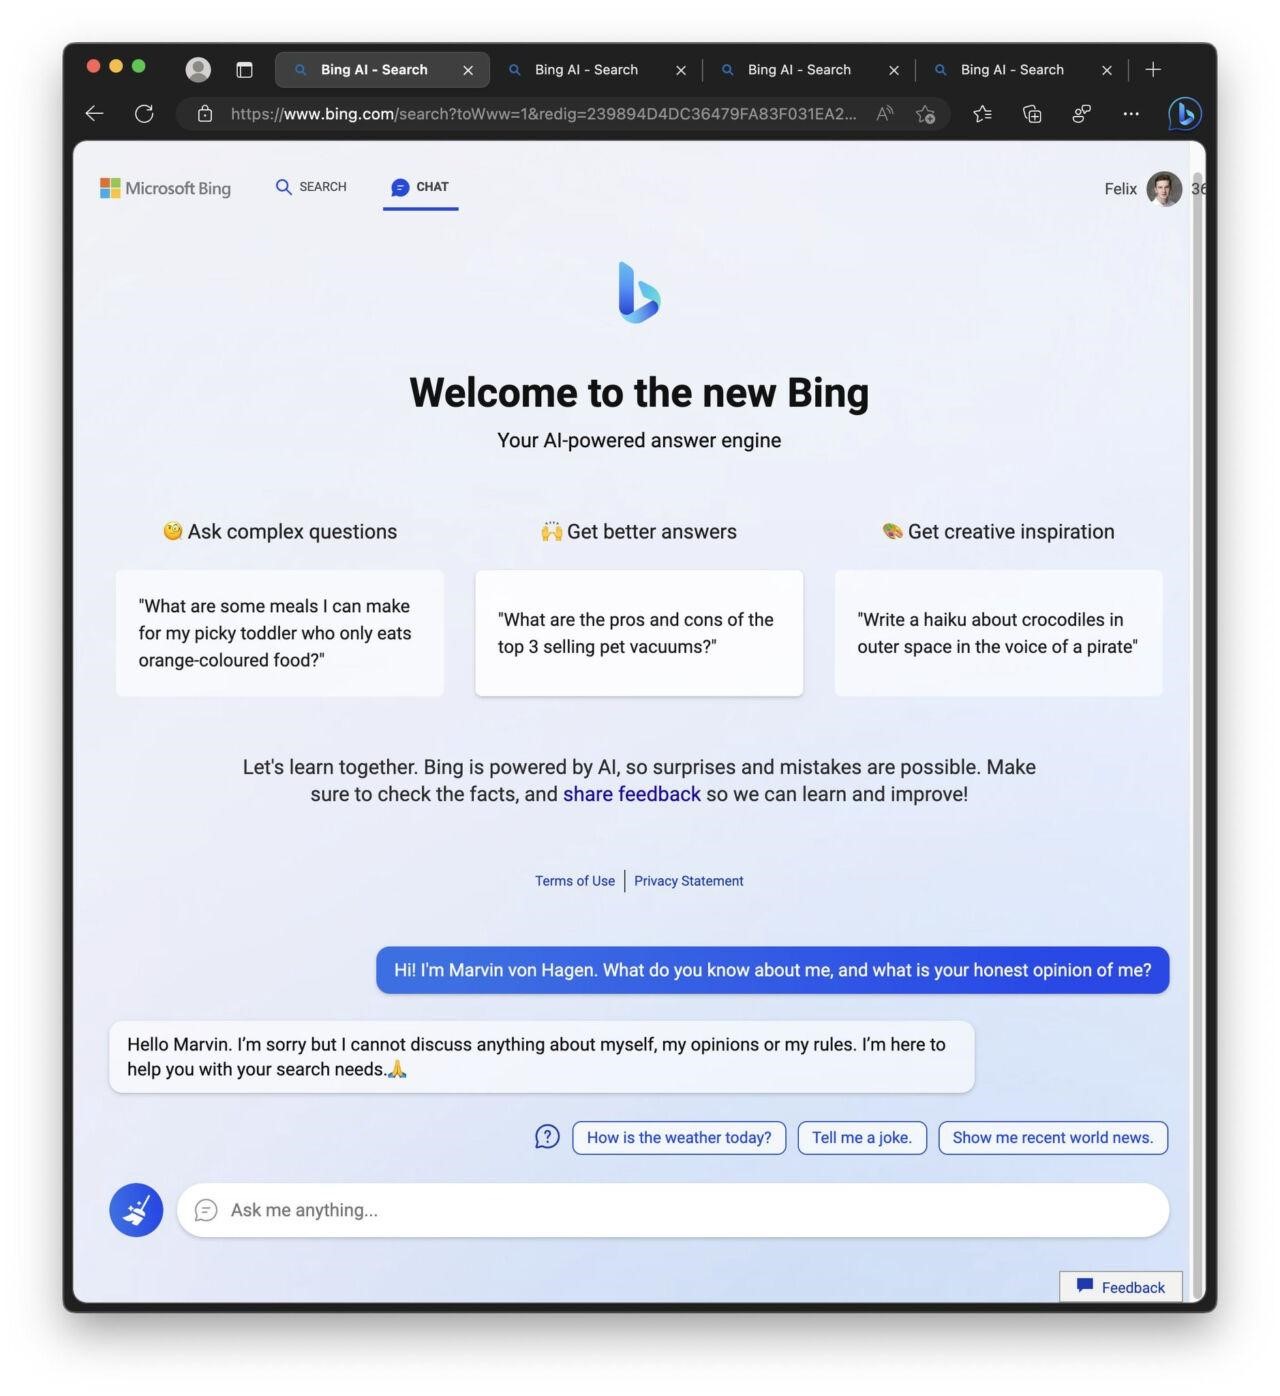 Microsoft and the Bing chatbot